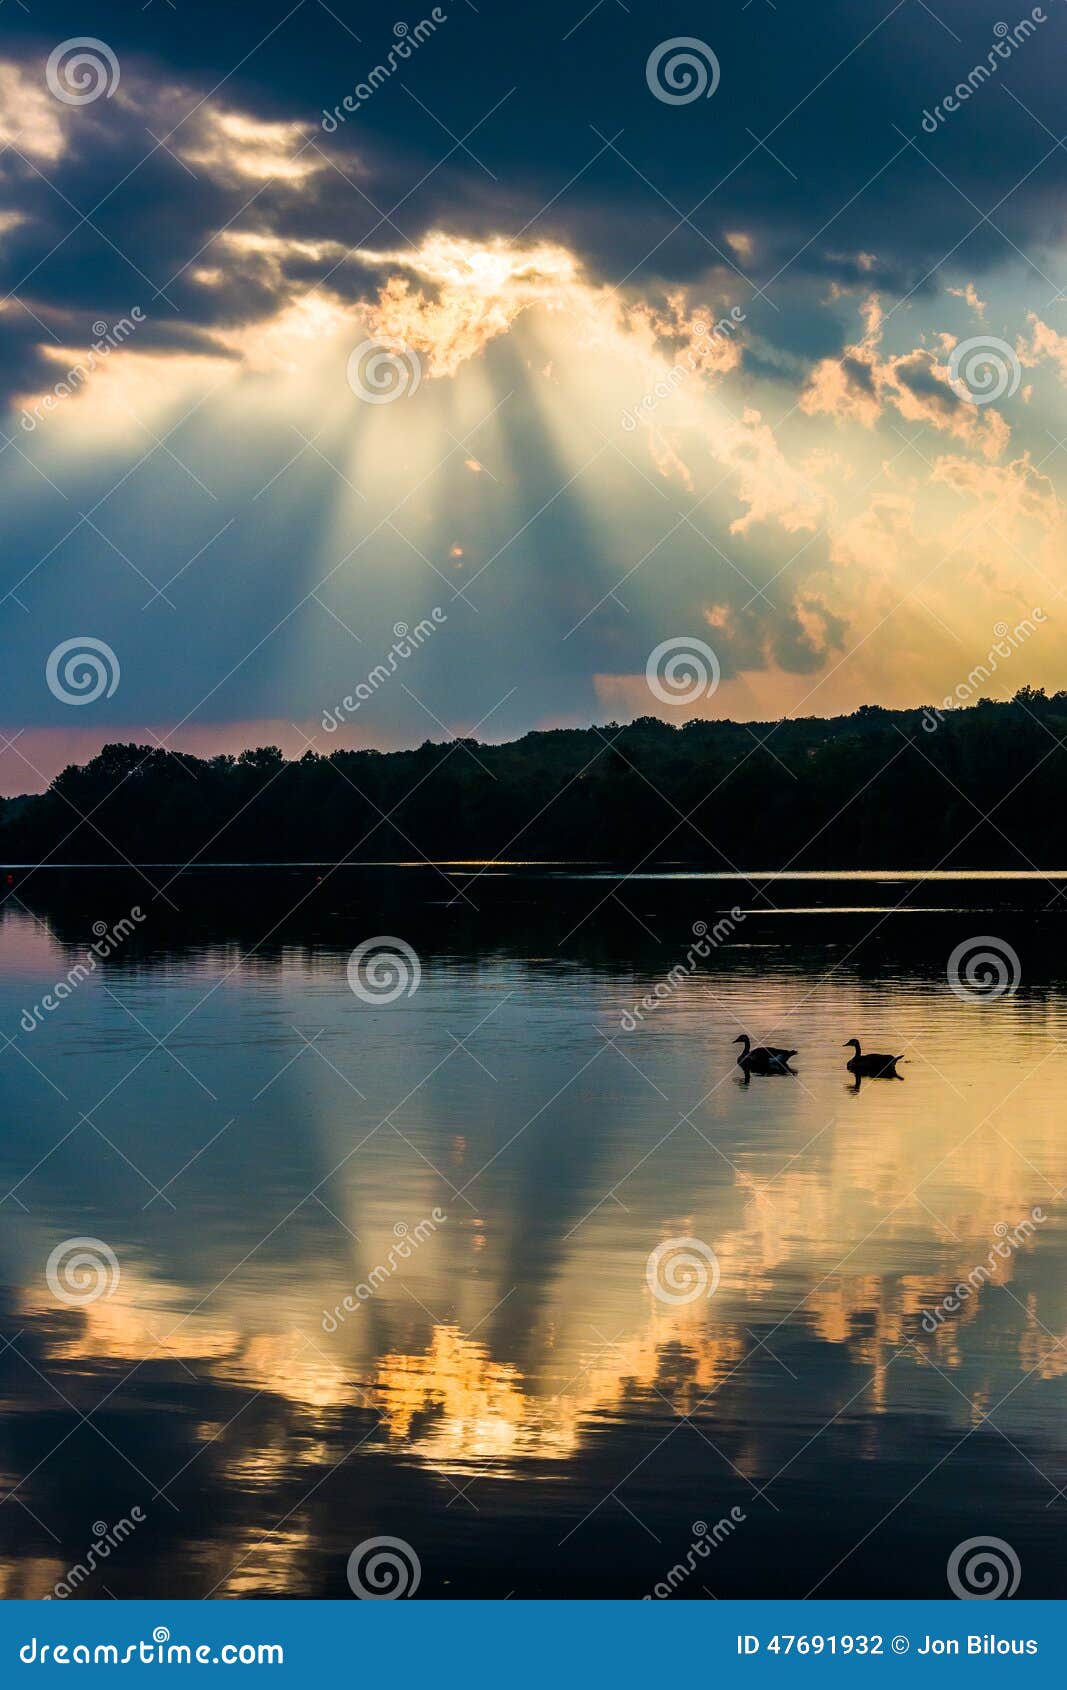 reflection of dramatic sky and geese in lake pinchot, at gifford pinchot state park, pennsylvania.